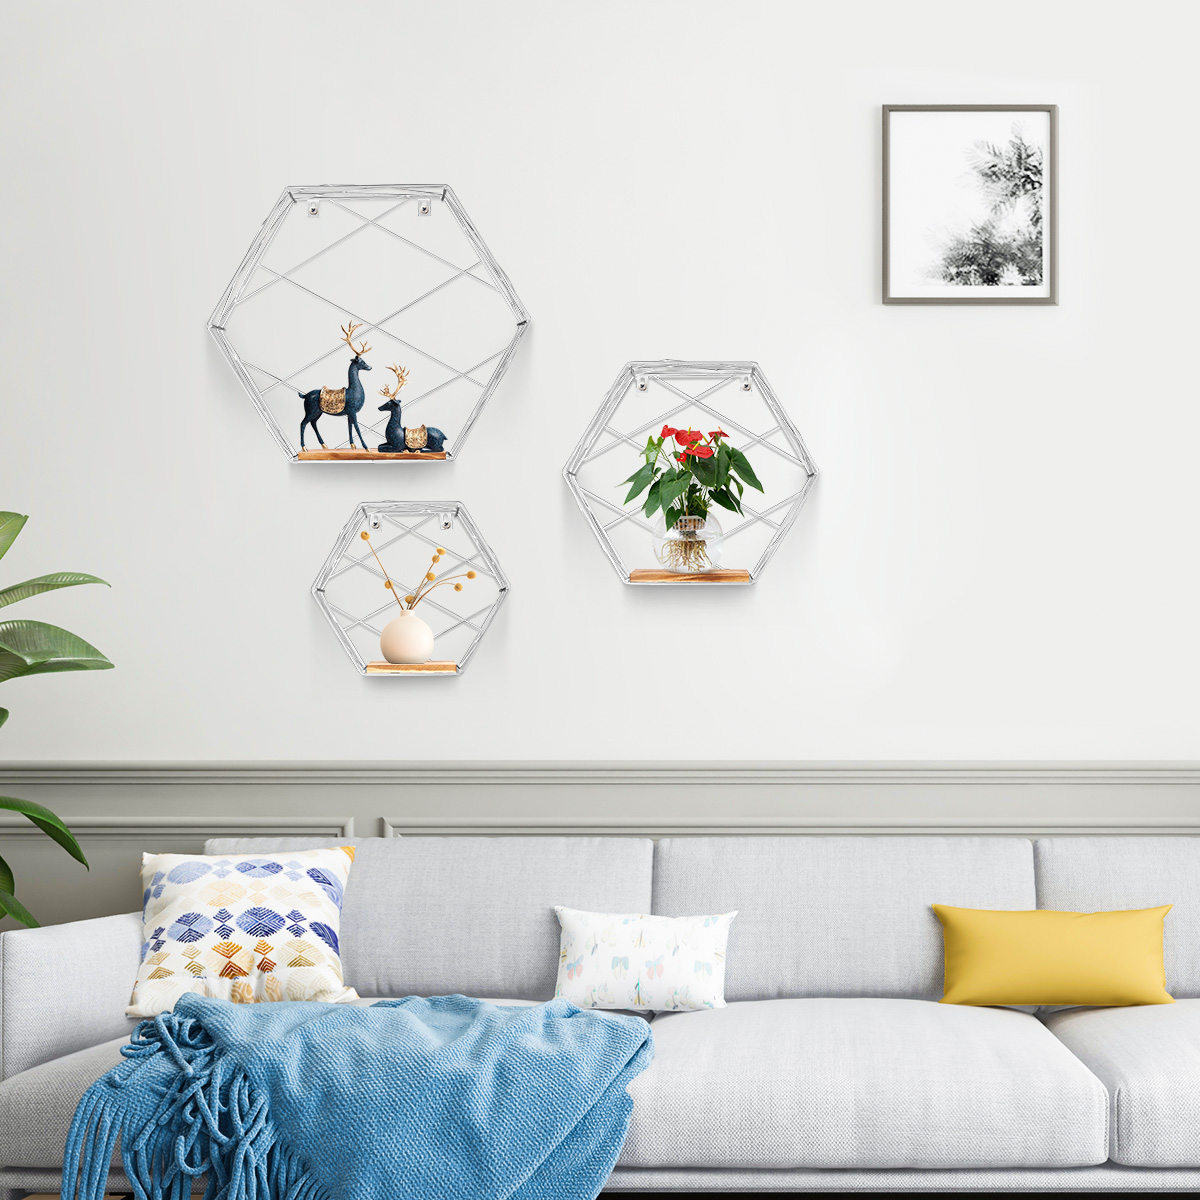 3Pcsset-Hexagonal-Wall-Mounted-Shelves-Floating-Wall-Storage-Rack-Holder-Organizer-Display-Stand-Hom-1792546-8